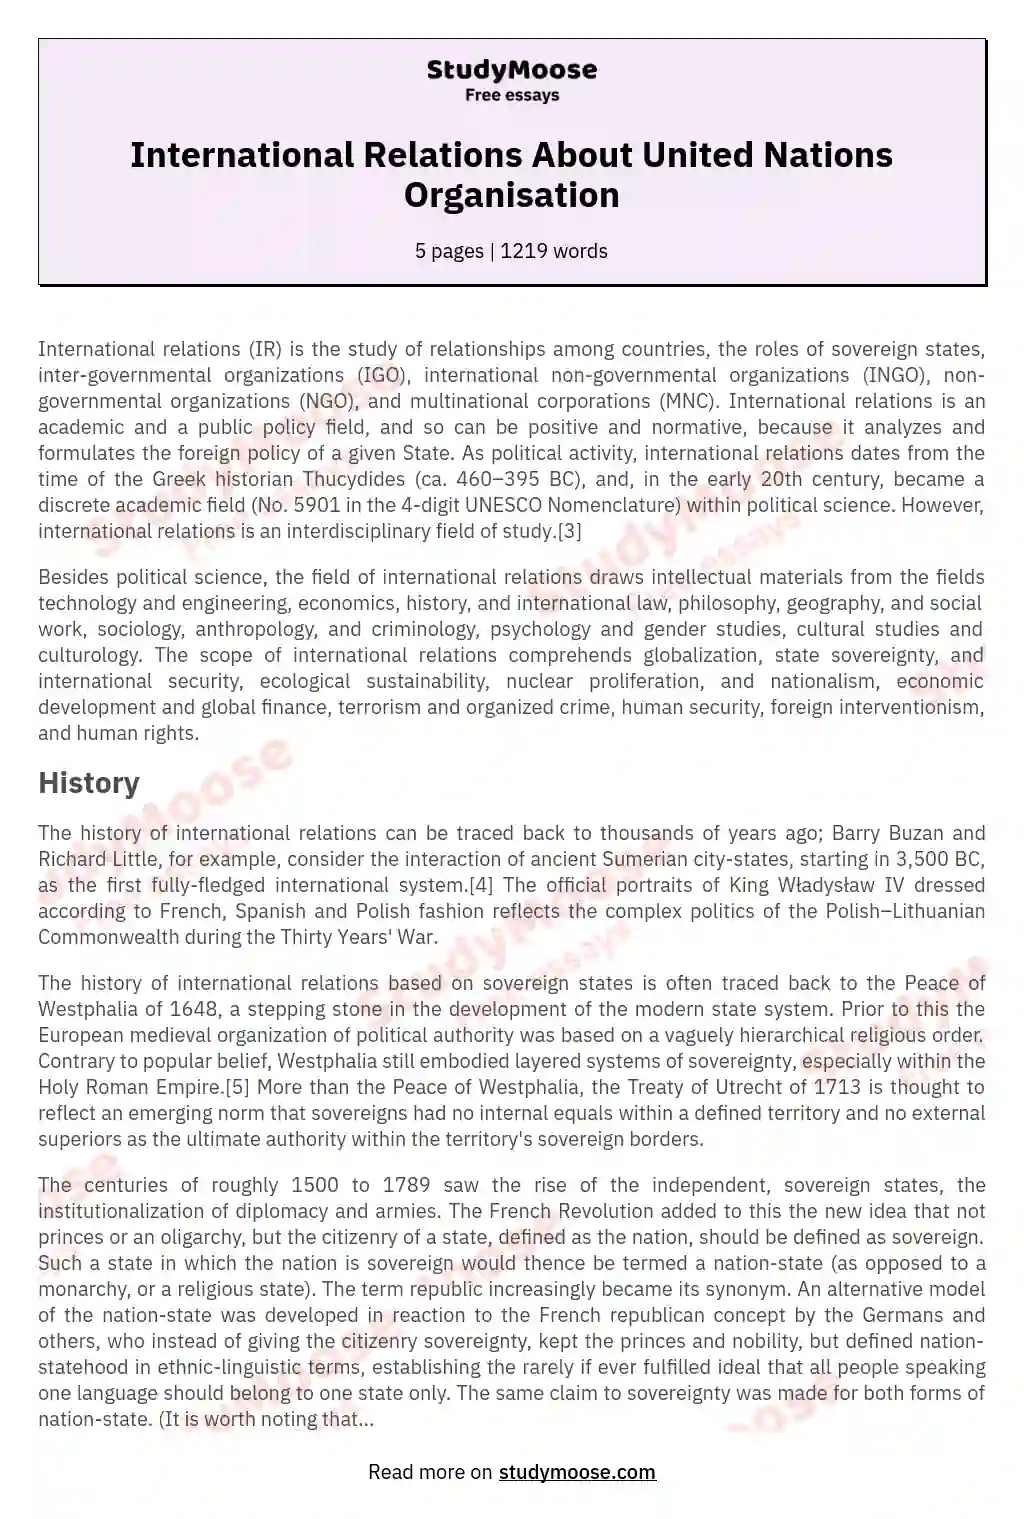 International Relations About United Nations Organisation essay